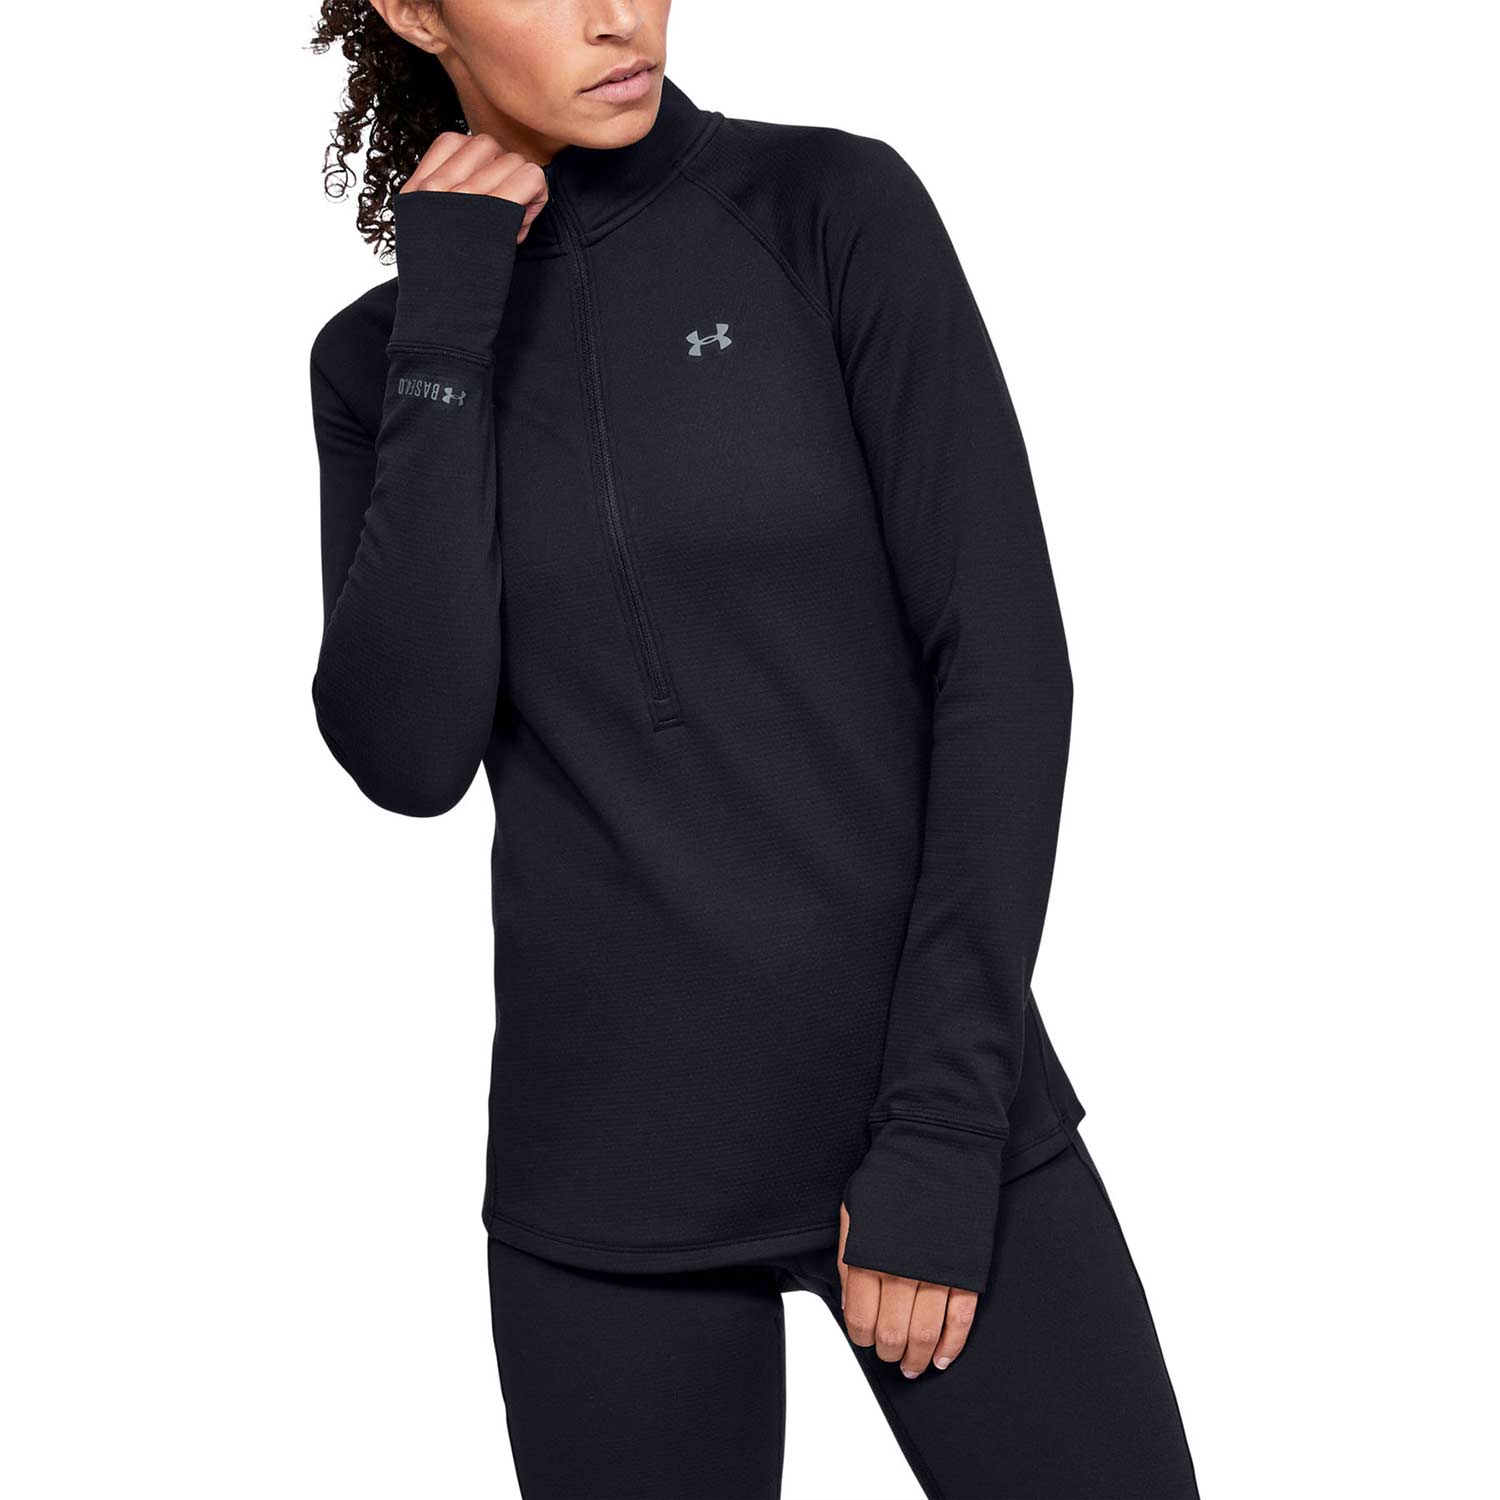 under armour jackets women's active